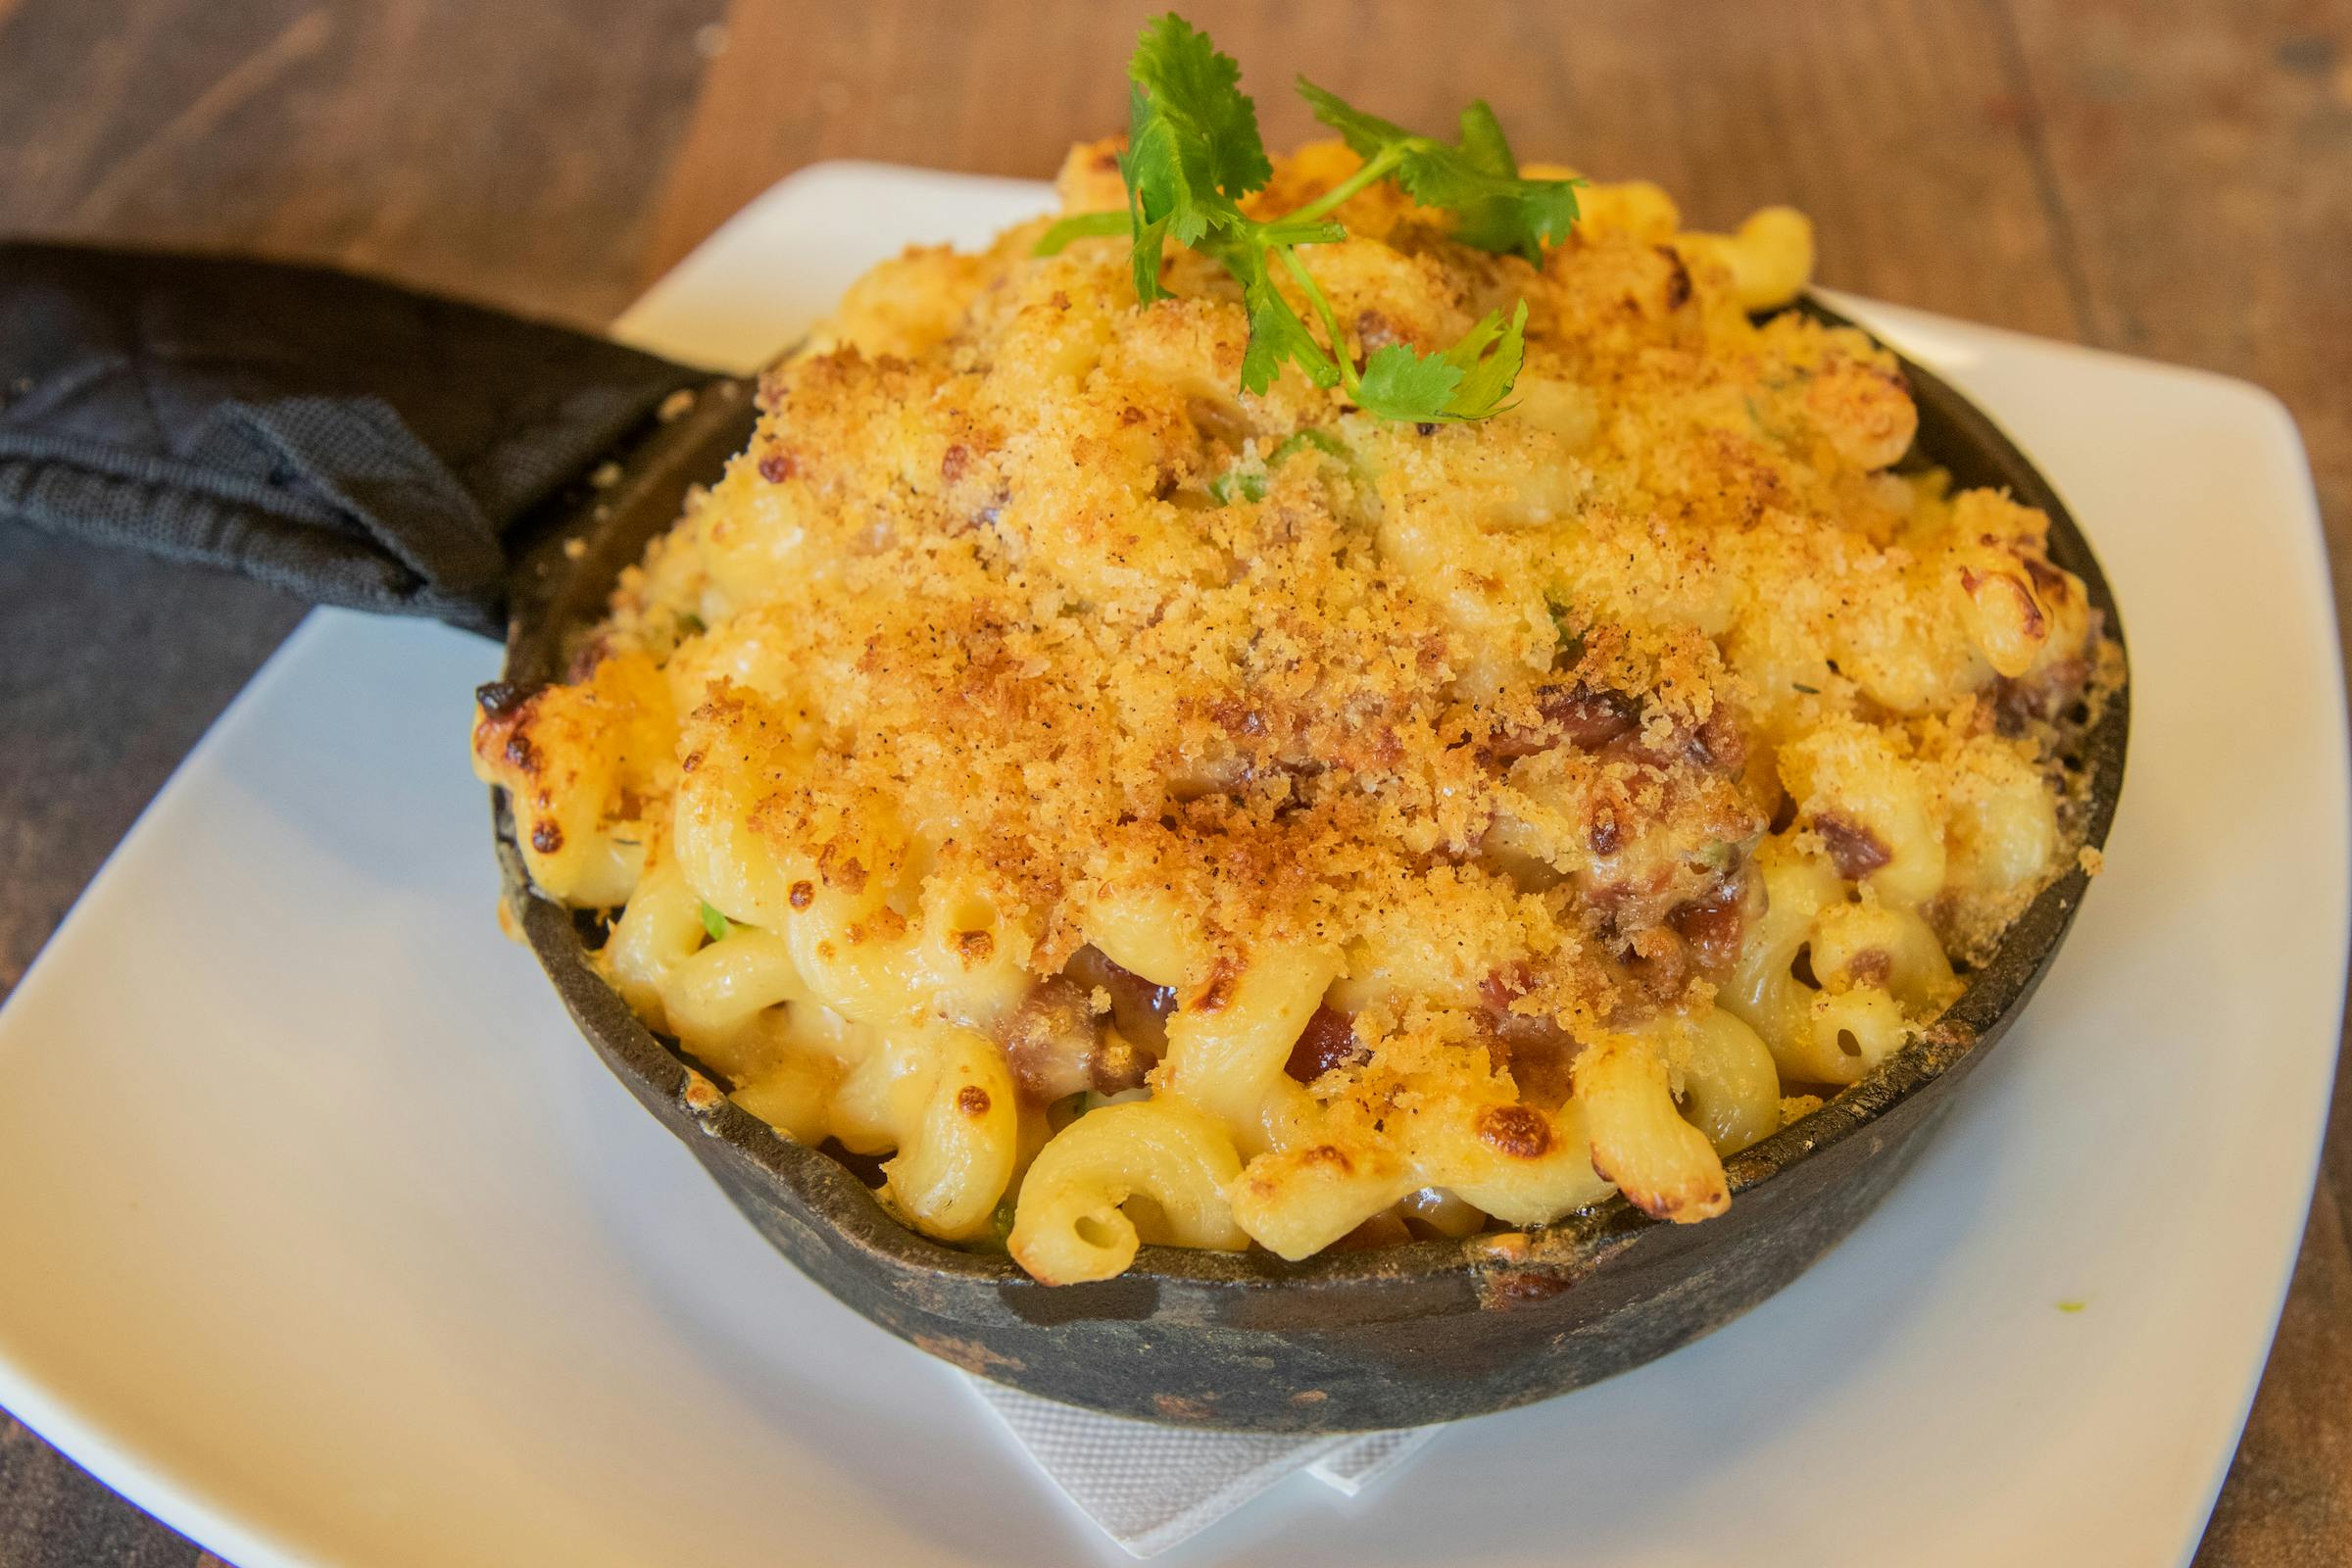 Baked Skillet Mac & Cheese from Firehouse Grill - Chicago Ave in Evanston, IL